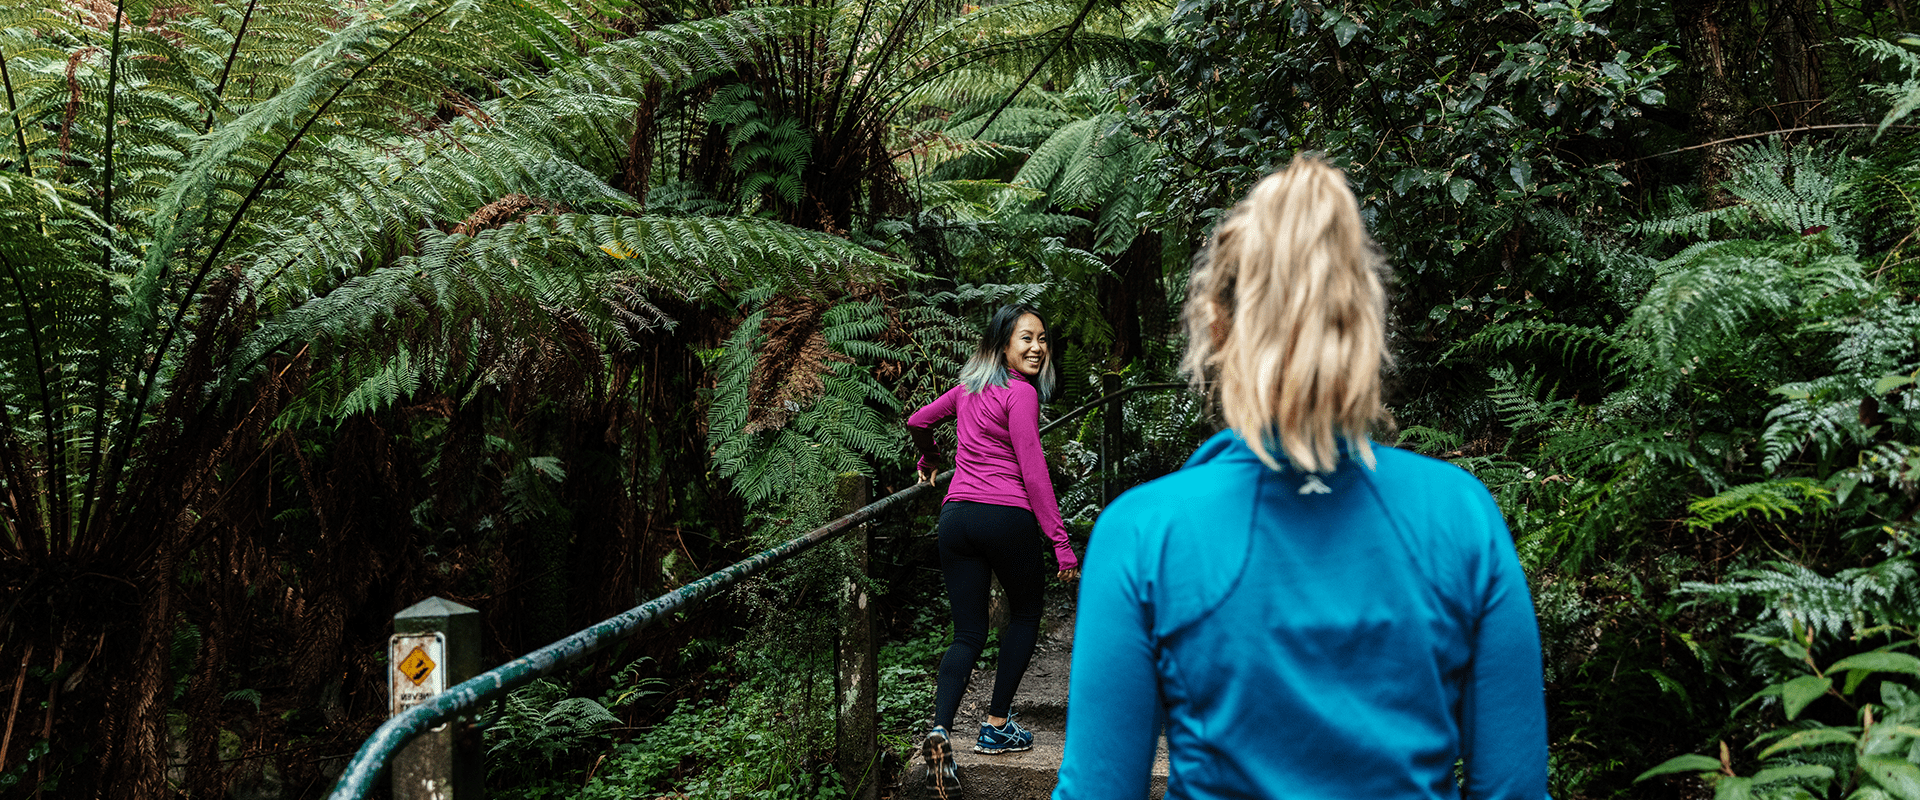 Two females enjoying the walk up the 1000 steps trail they are surrounded by stunning lush tree ferns and tall forest.